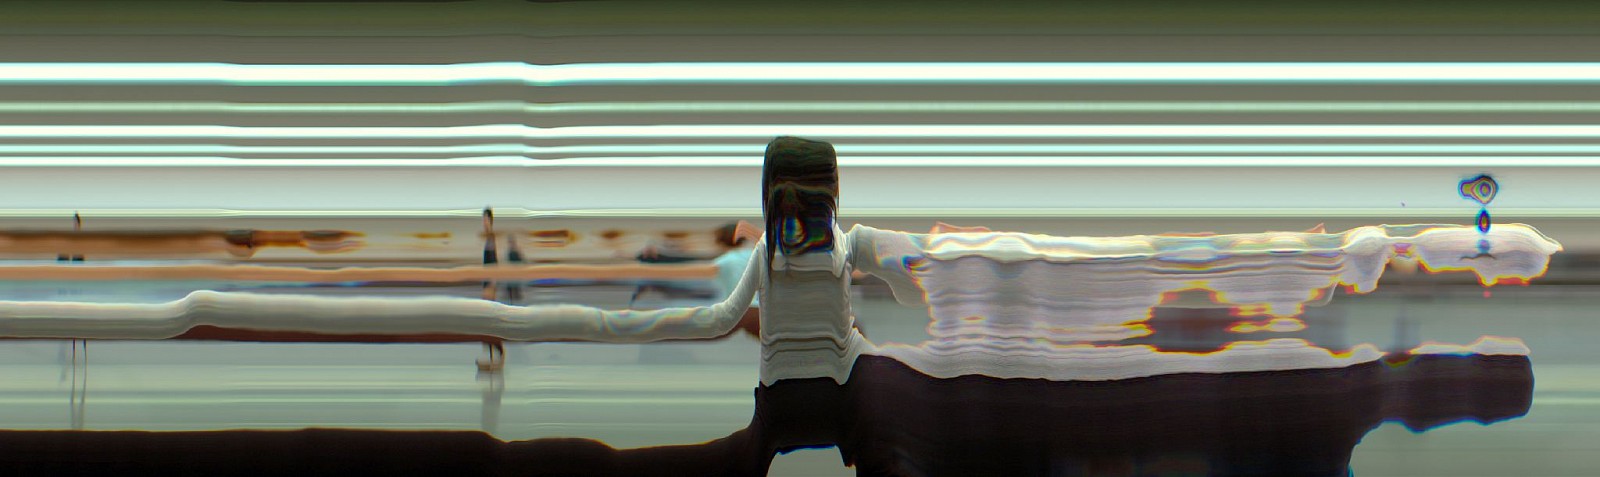 Jay Mark Johnson, TAICHI MOTION STUDY 1, 2005 Los Angeles CA
archival pigment on paper, mounted on aluminum, 40 x 134 in. (101.6 x 340.4 cm)